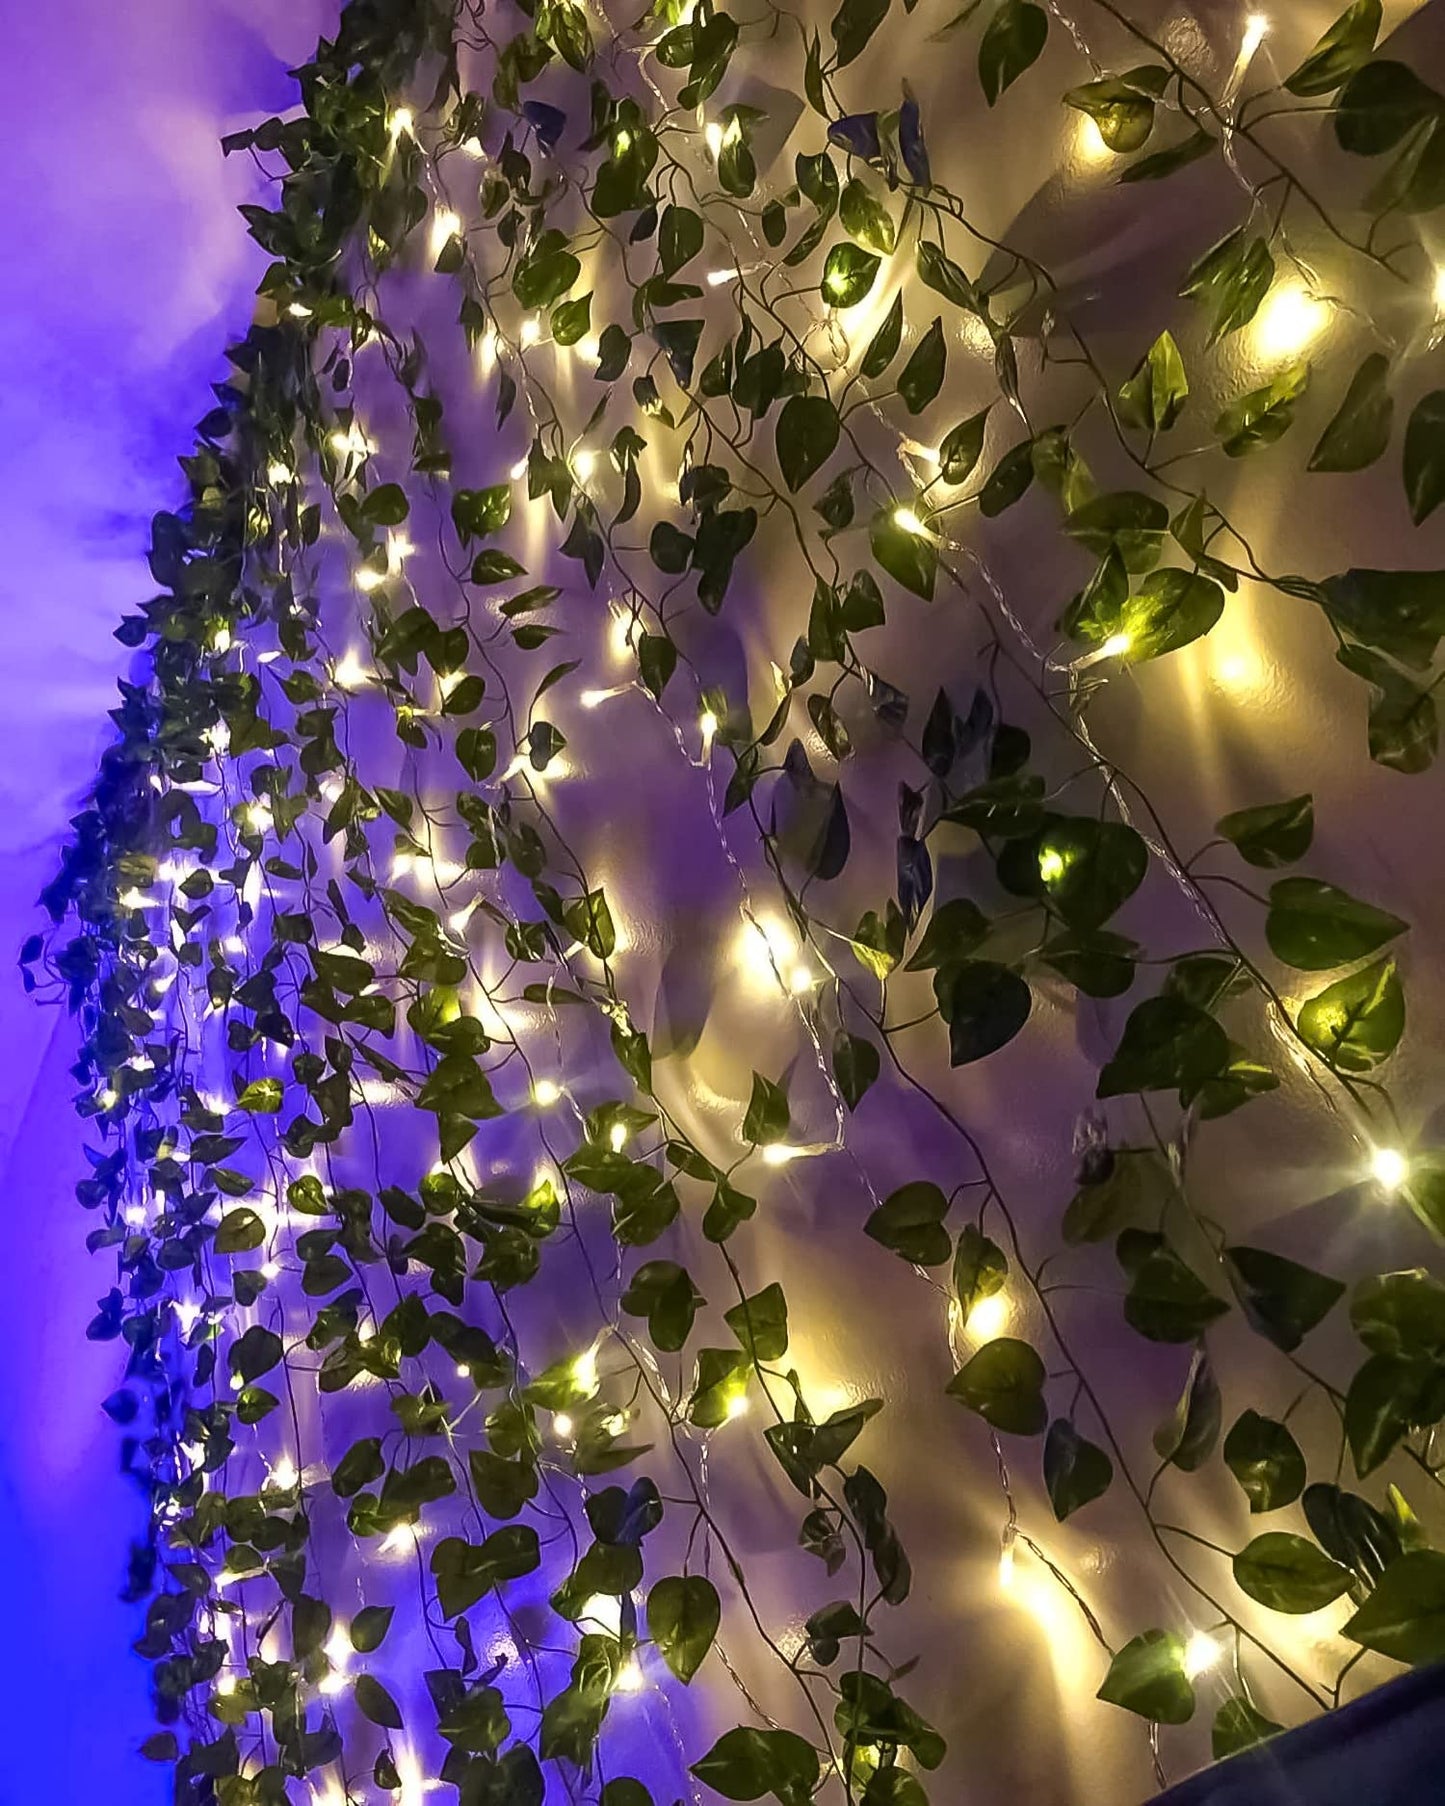 Specialyou.In Special You Aesthetic Room Decor Items, Home Decor Items With Fairy Lights For Bedroom Artificial Vines, Green Leaves (86 Inch) (4 Green Vines & 1 Led Light)